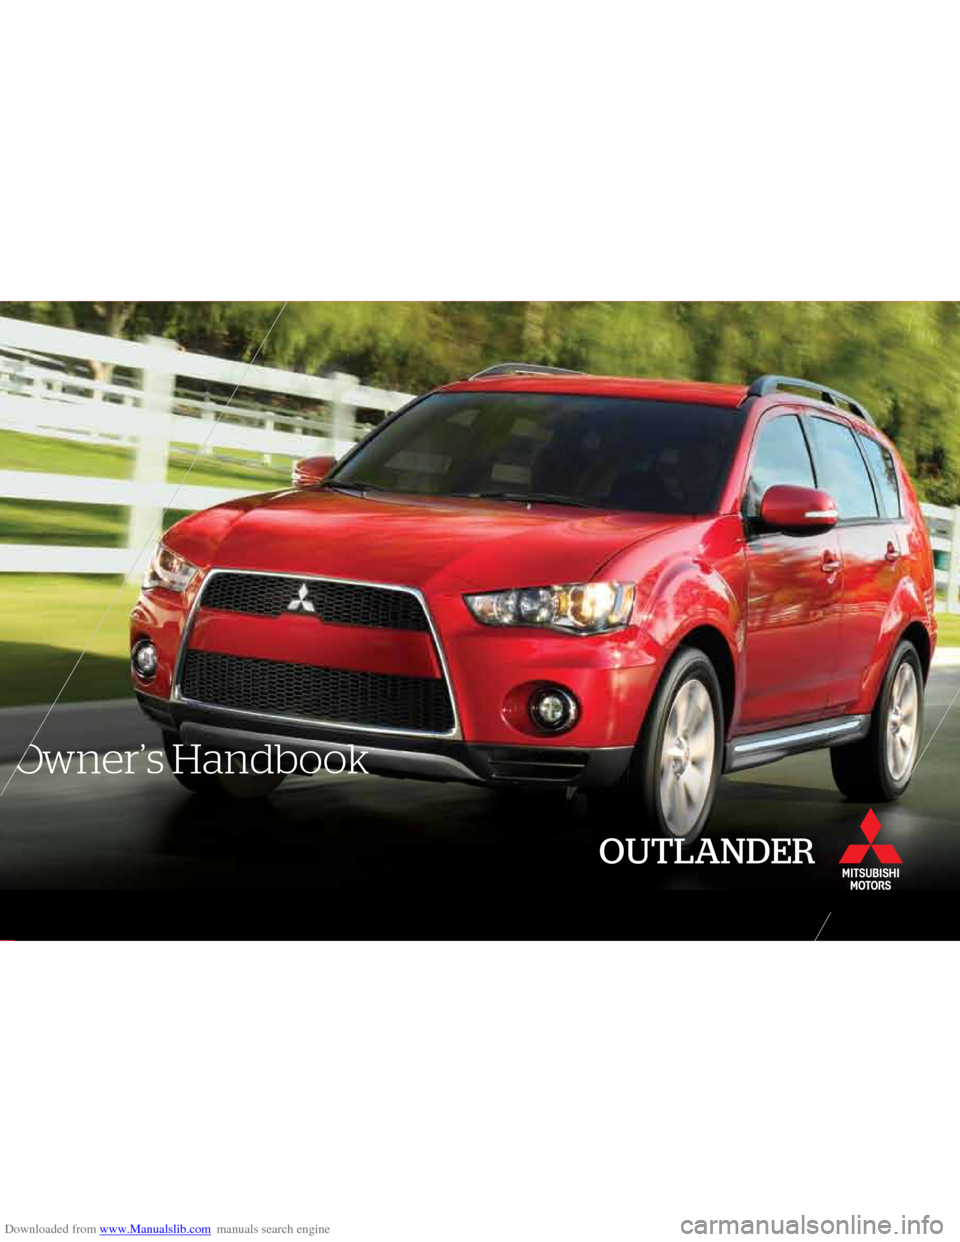 MITSUBISHI OUTLANDER 2005 2.G Owners Handbook Downloaded from www.Manualslib.com manuals search engine CLIENT: MITSUBISHI
A GENC Y:  IMGPS
DA TE:   9 .21.2010 INK: 
4/C PROCES S
DESIGNER:  C. LAMBIASE
PRO JECT : OUTLANDER HANDBOOK
Dieline -DO NO 